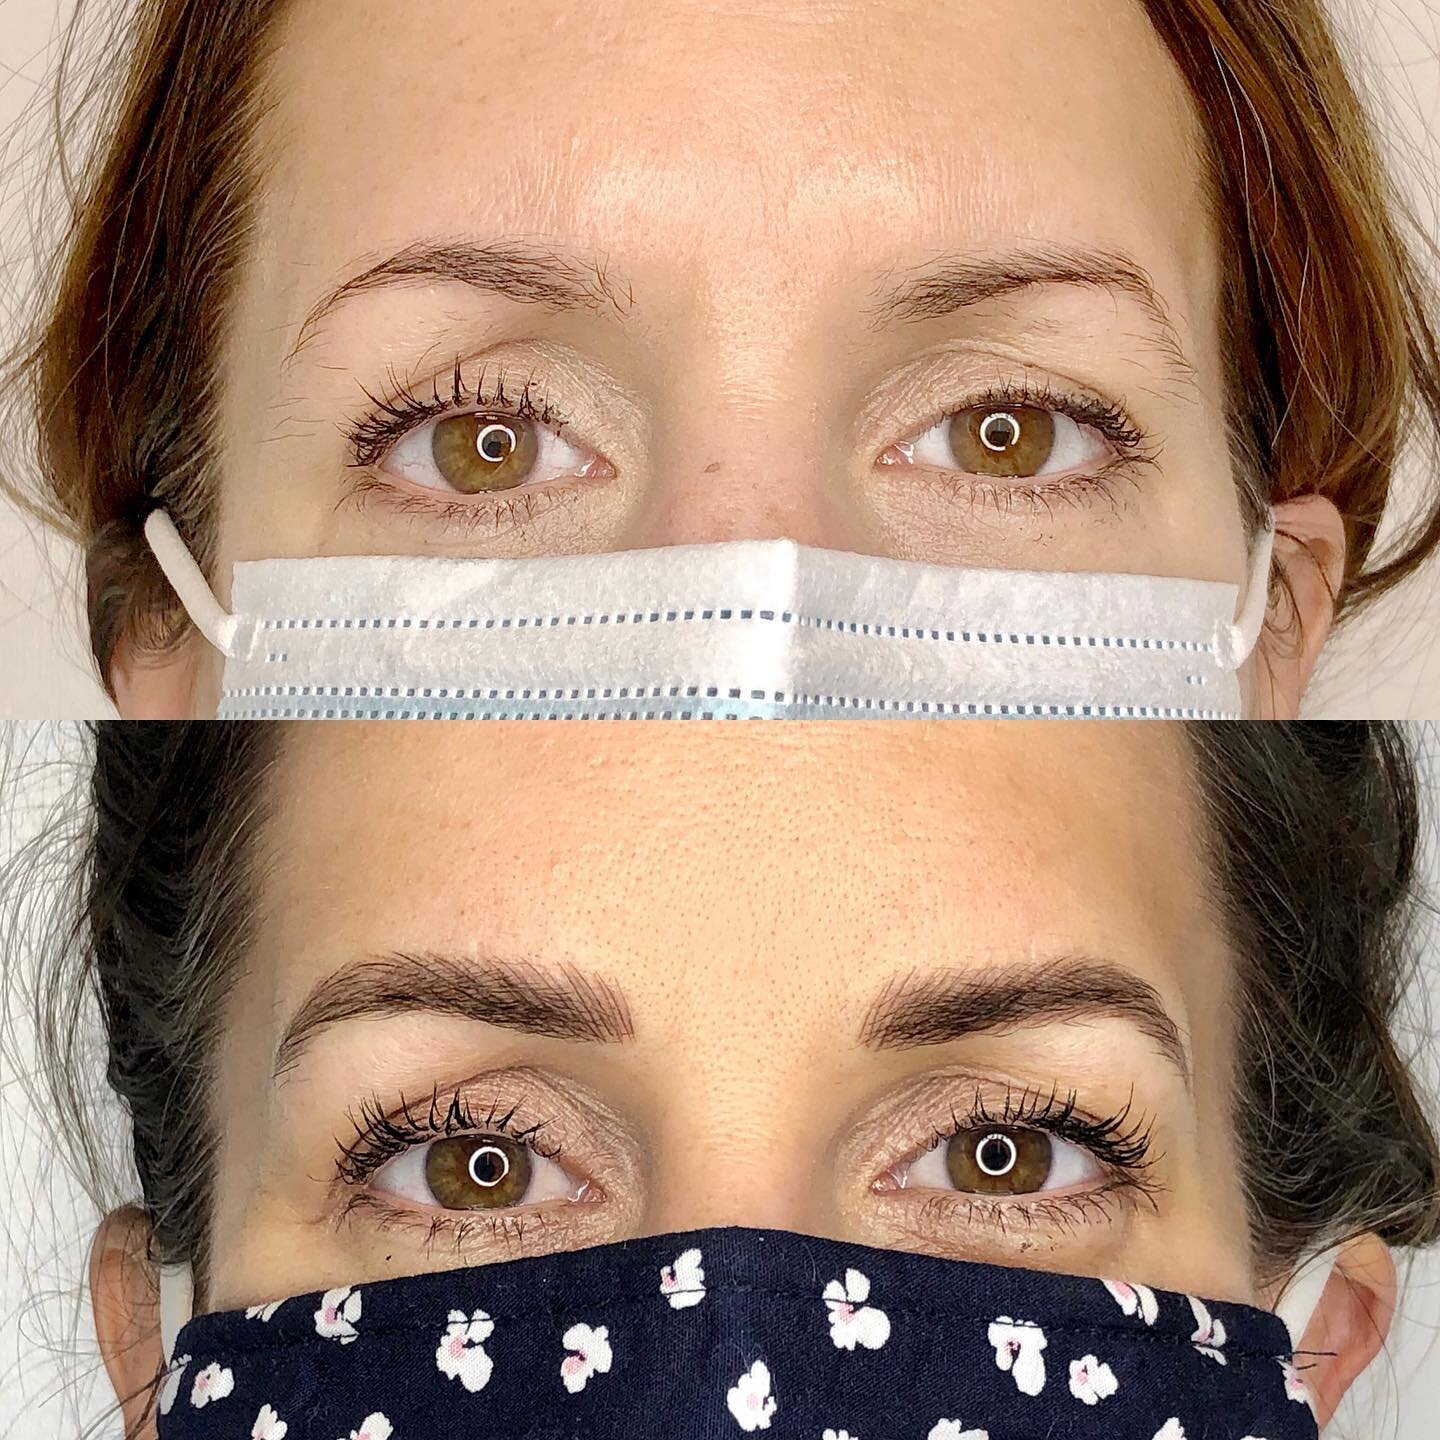 One heck of a brow glow-up JUST in time for summer fun! ☀️ 🏖 

service // microblading (bottom photo immediately after second session)

*books currently closed.